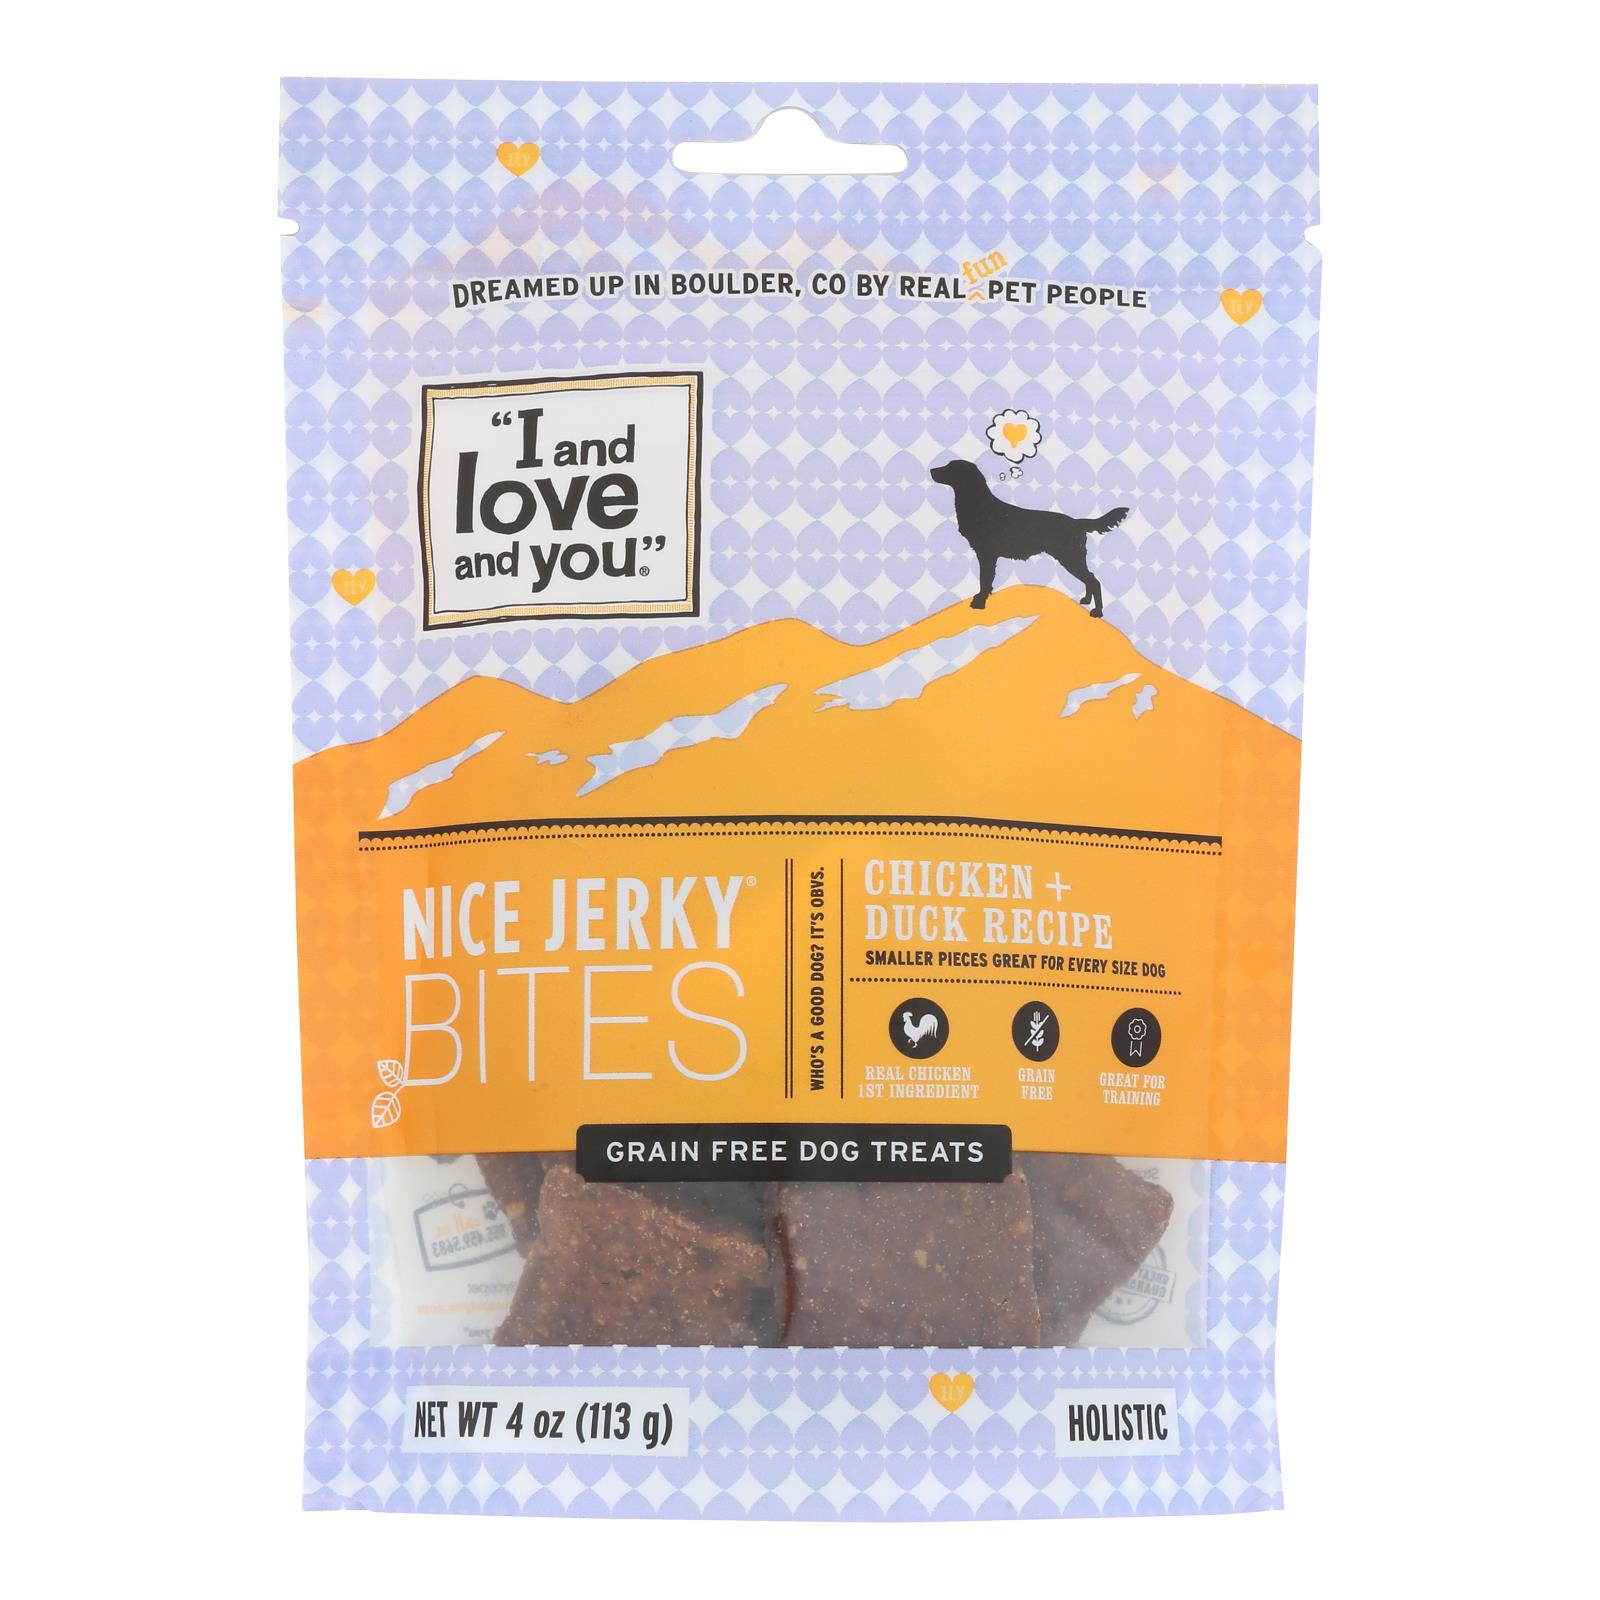 I And Love And You - Dog Treats Jrky Chkn&duck - Case Of 6 - 4 Oz